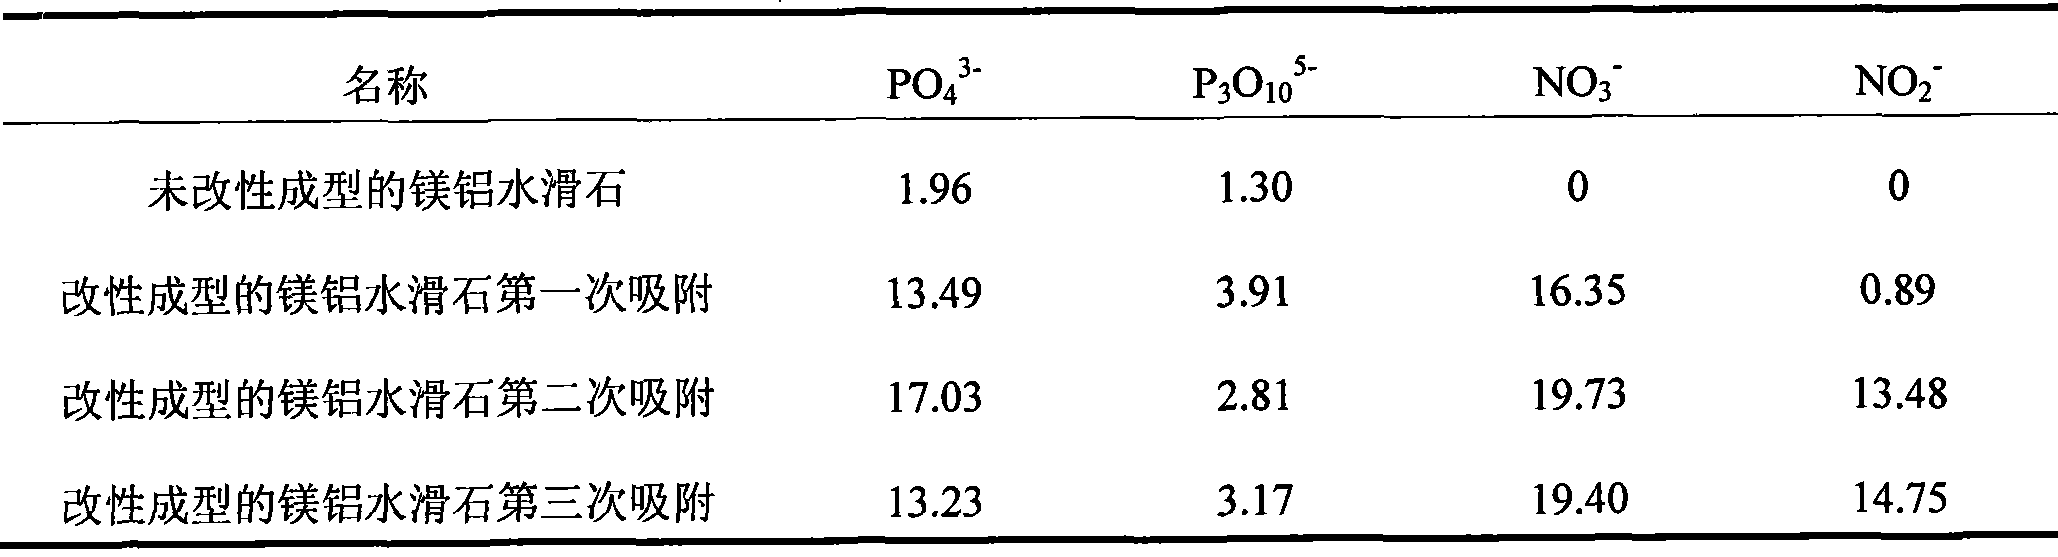 Method for preparing modification forming magnalium hydrotalcite and application